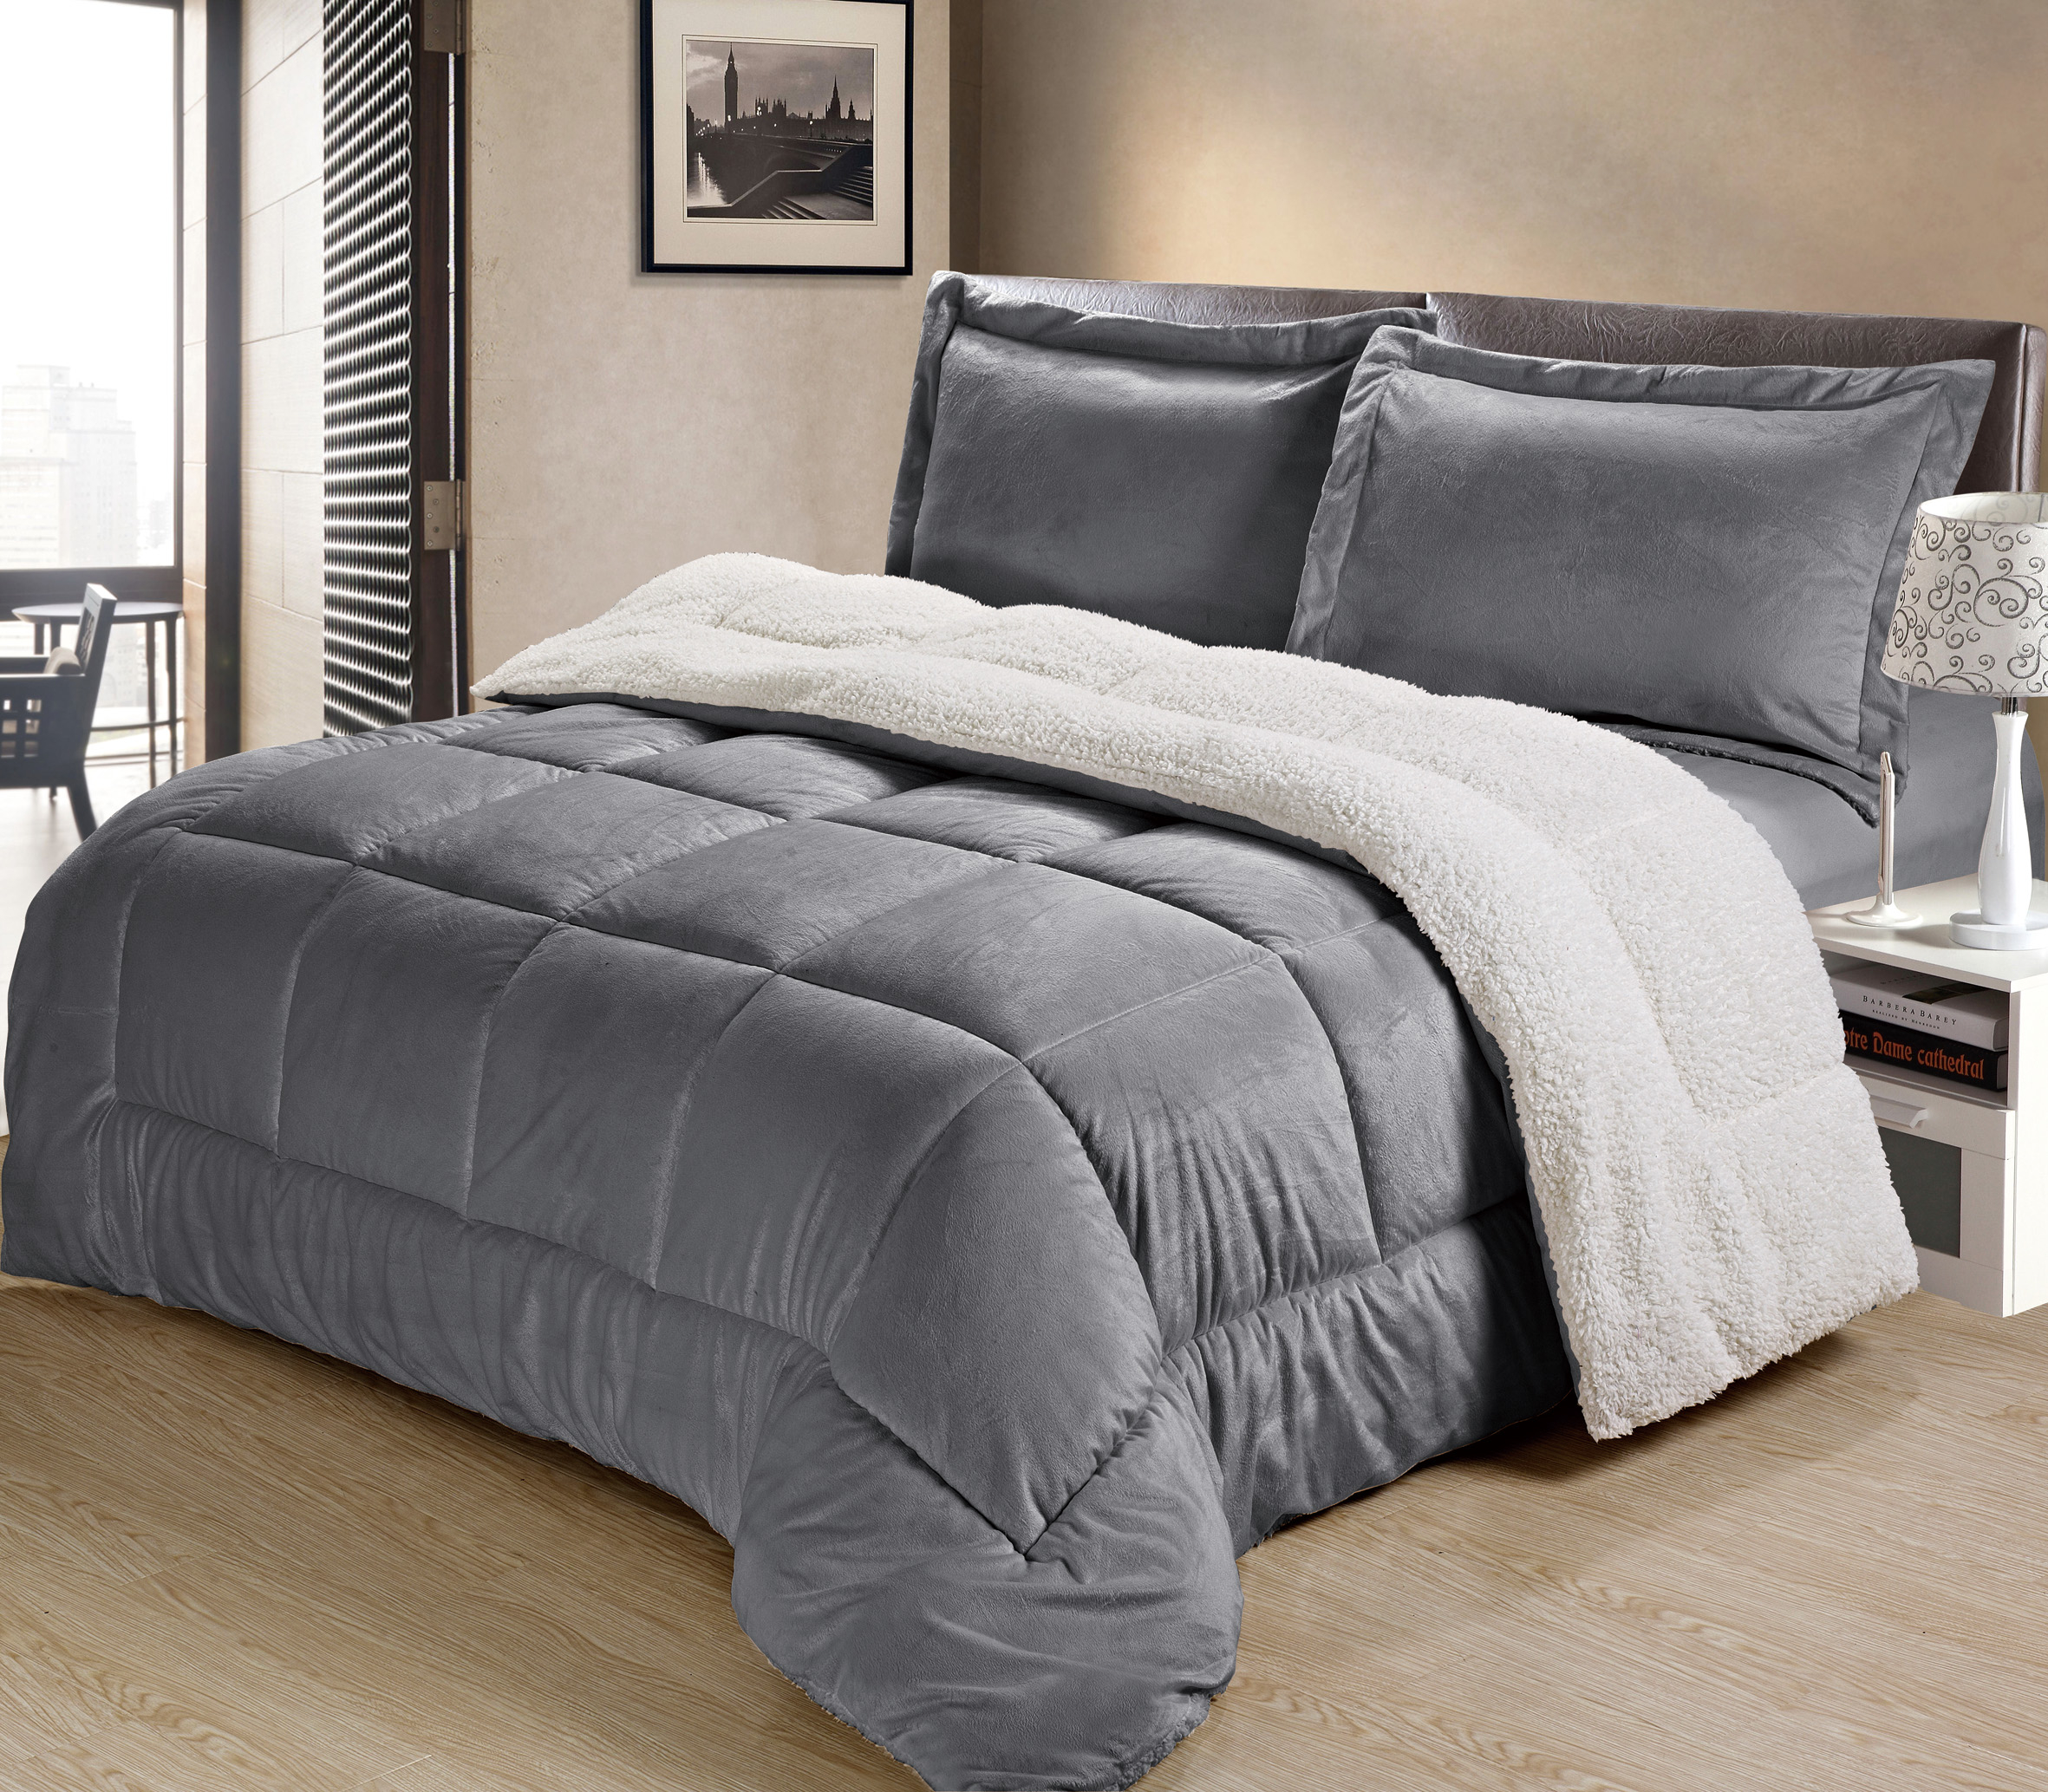 Home Classic Collection Micro Mink Sherpa Convertible Comforter Set - Twin, Pewter